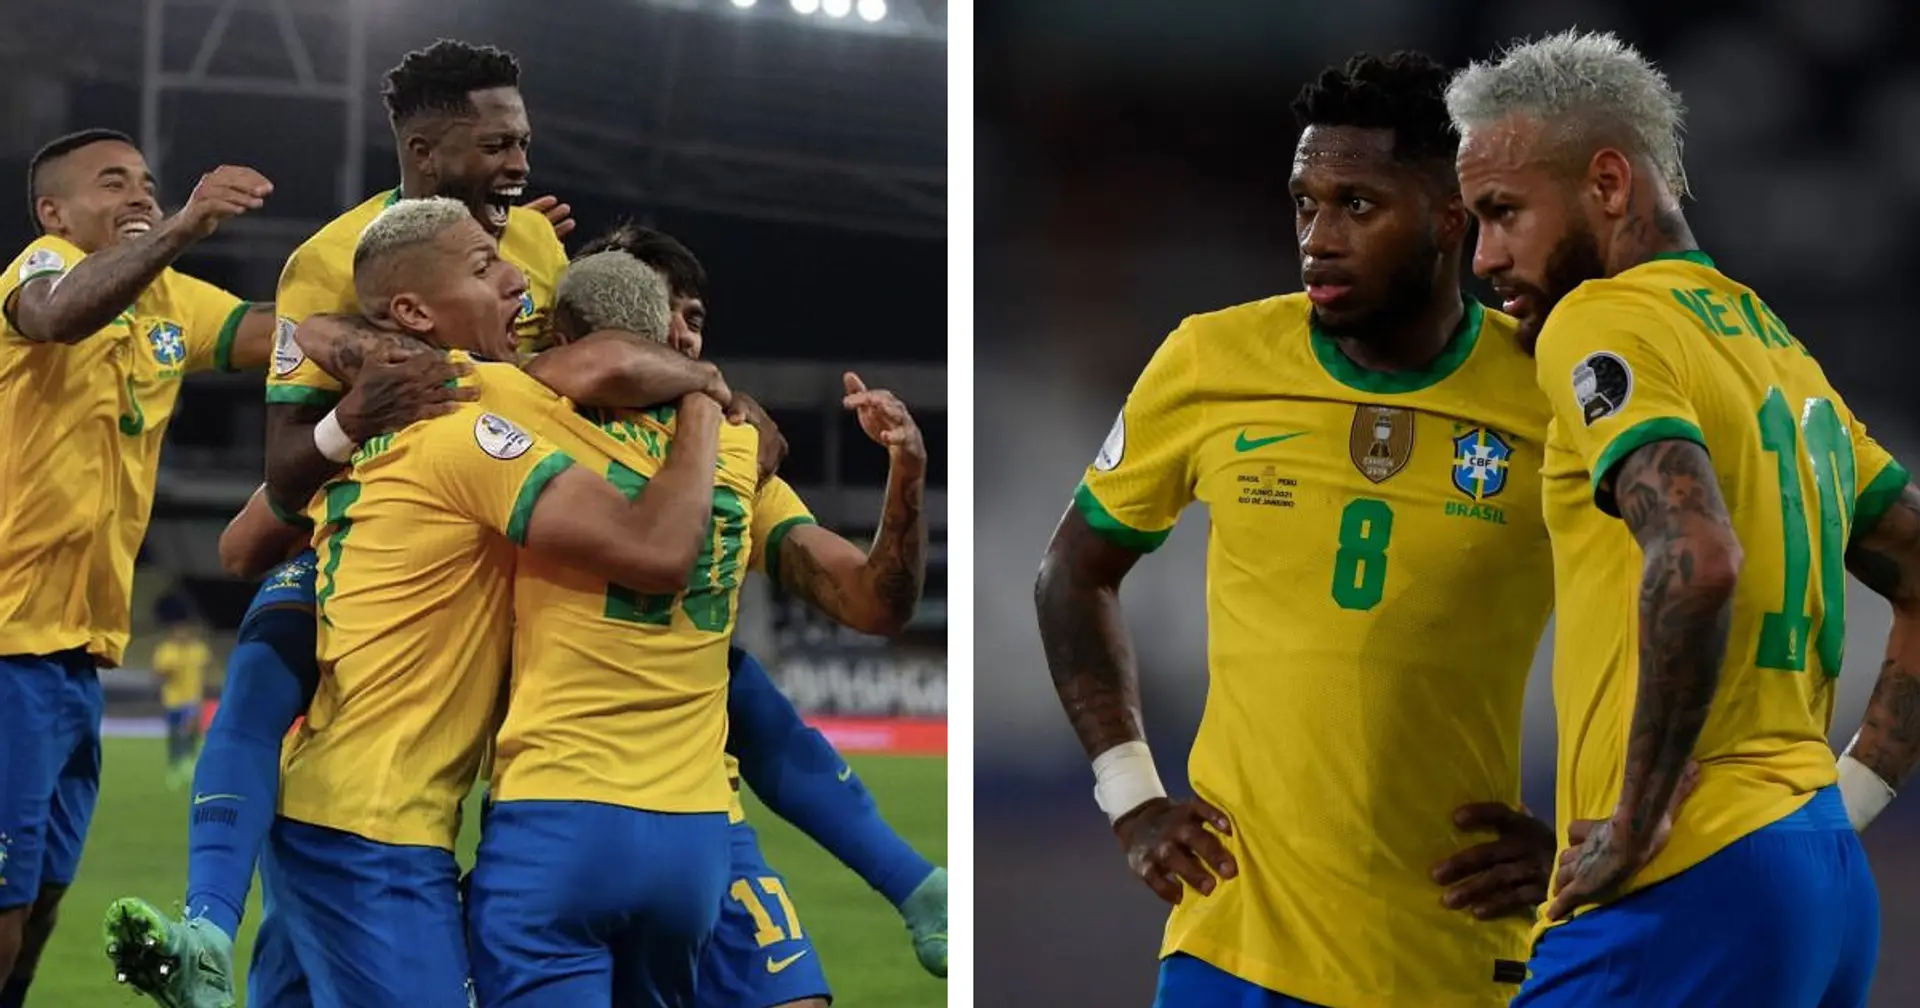 Midfield warrior: 4 stats show Fred's influence for Brazil at Copa America